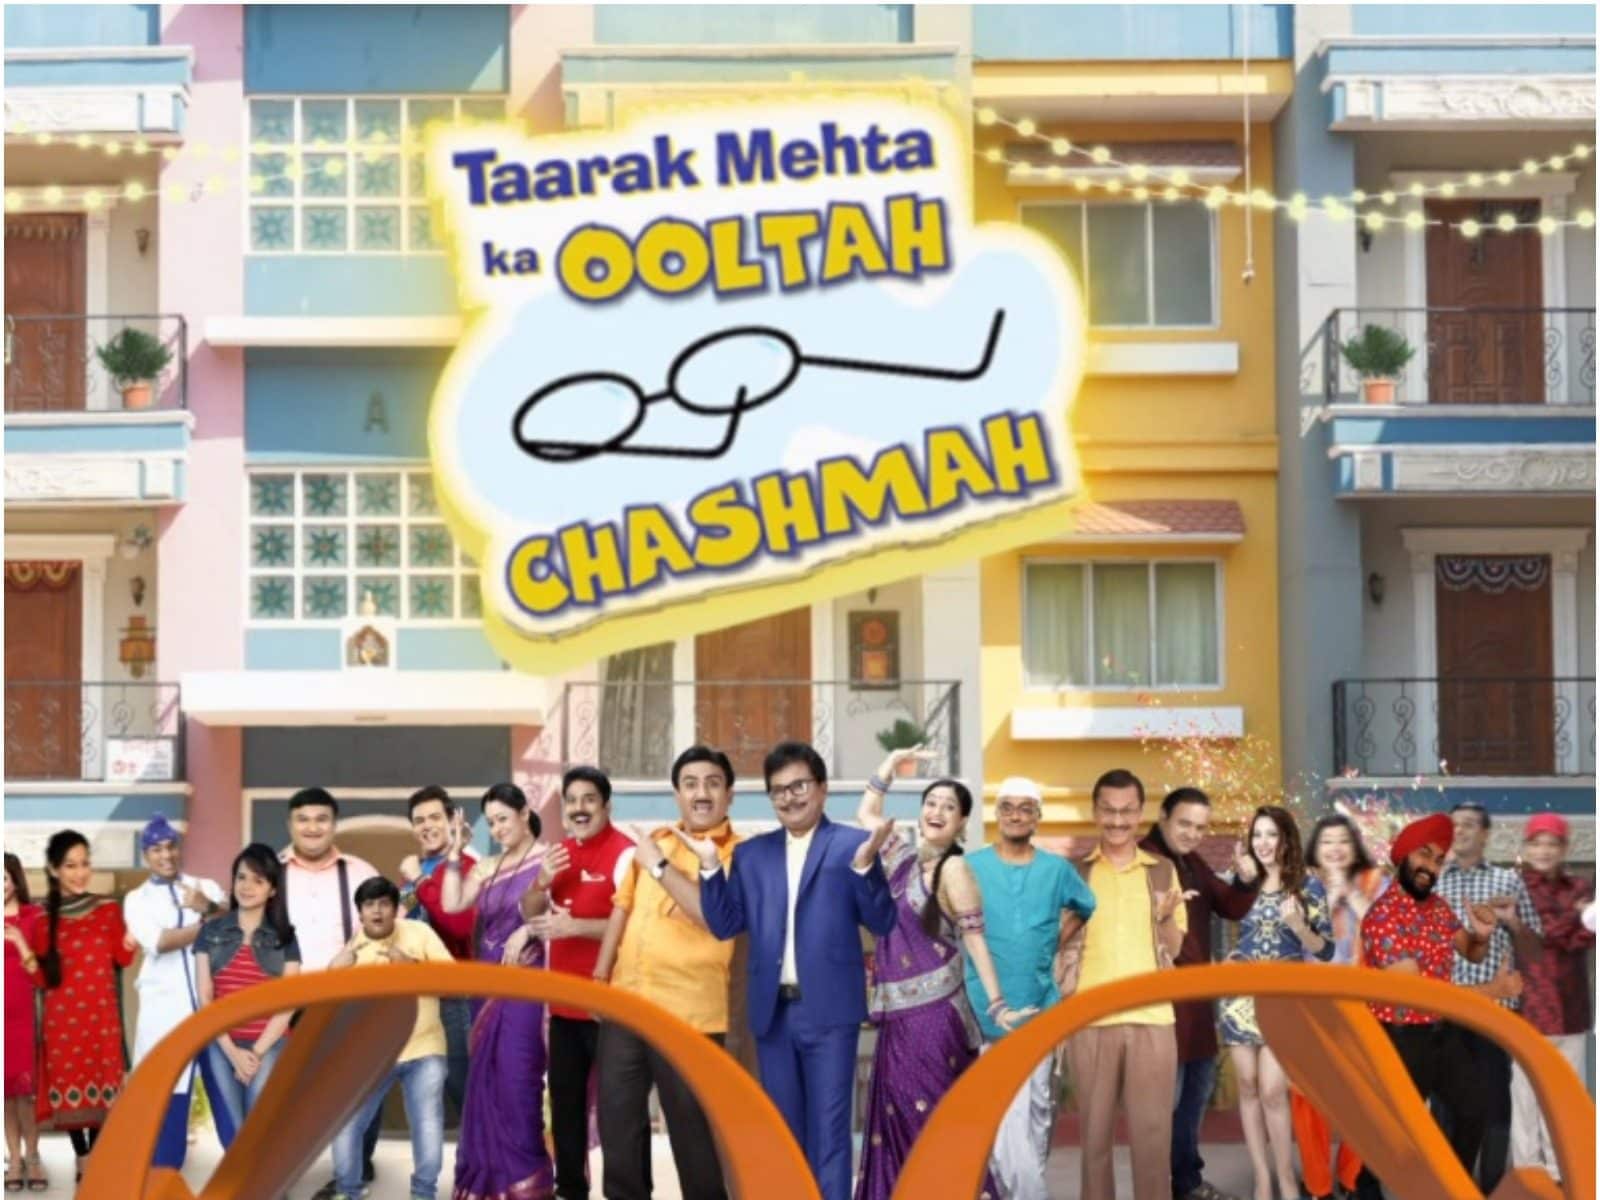 Taarak Mehta Ka Ooltah Chashmah Themed Restaurant Is a Perfect Go-To Place  For Fans; Have You Visited?